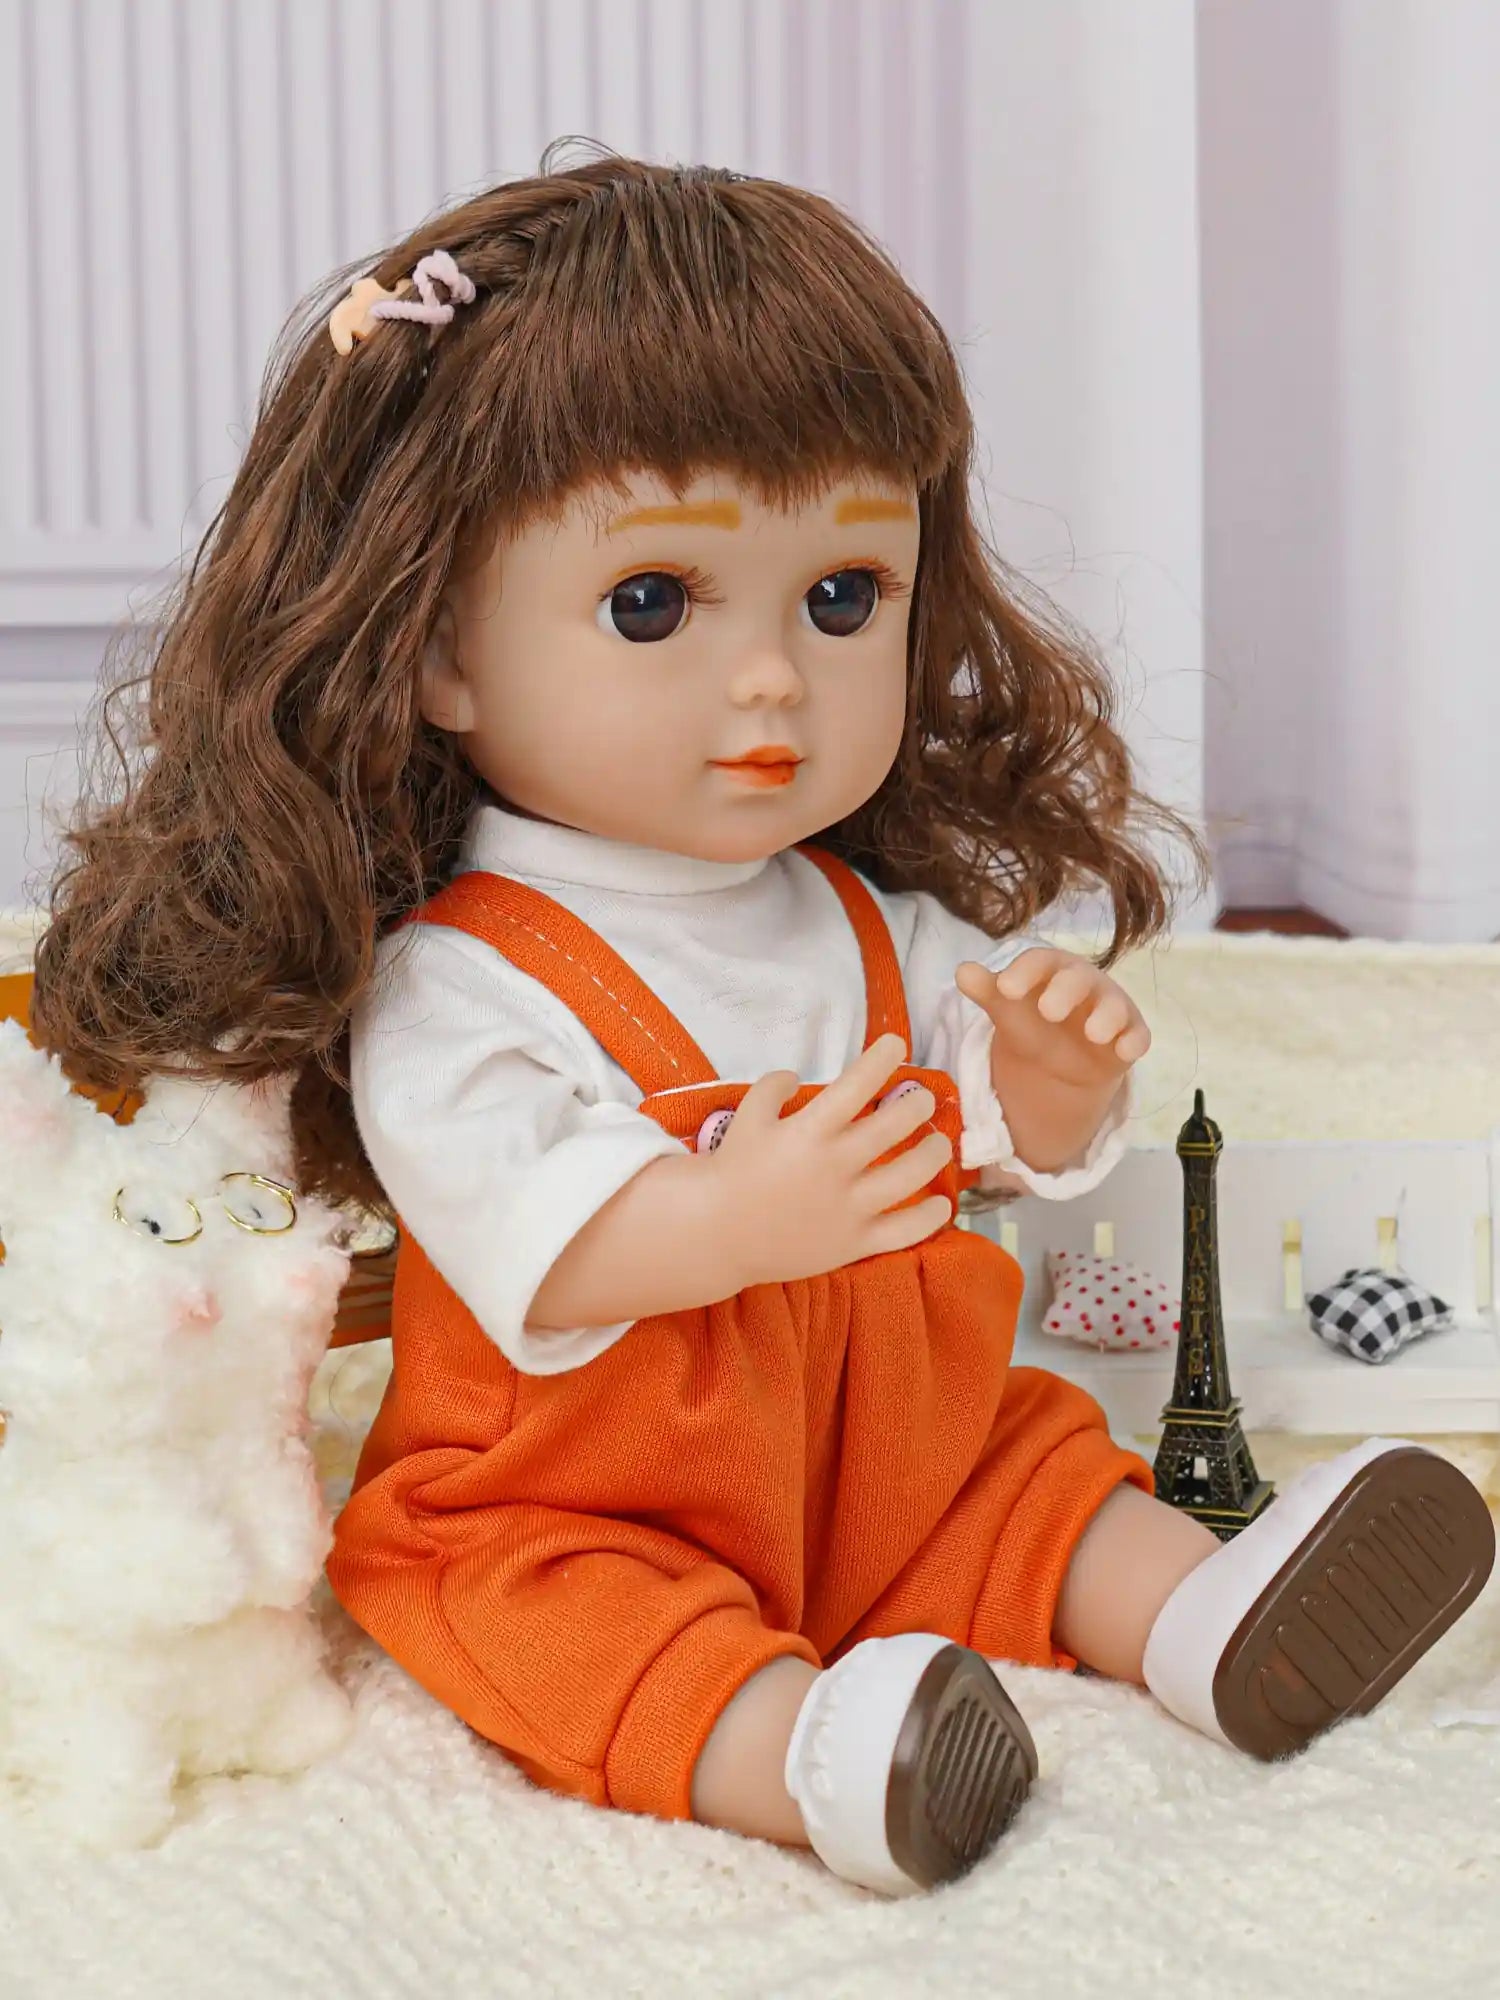 Toy doll in vibrant orange attire seated beside a white fluffy dog with spectacles.